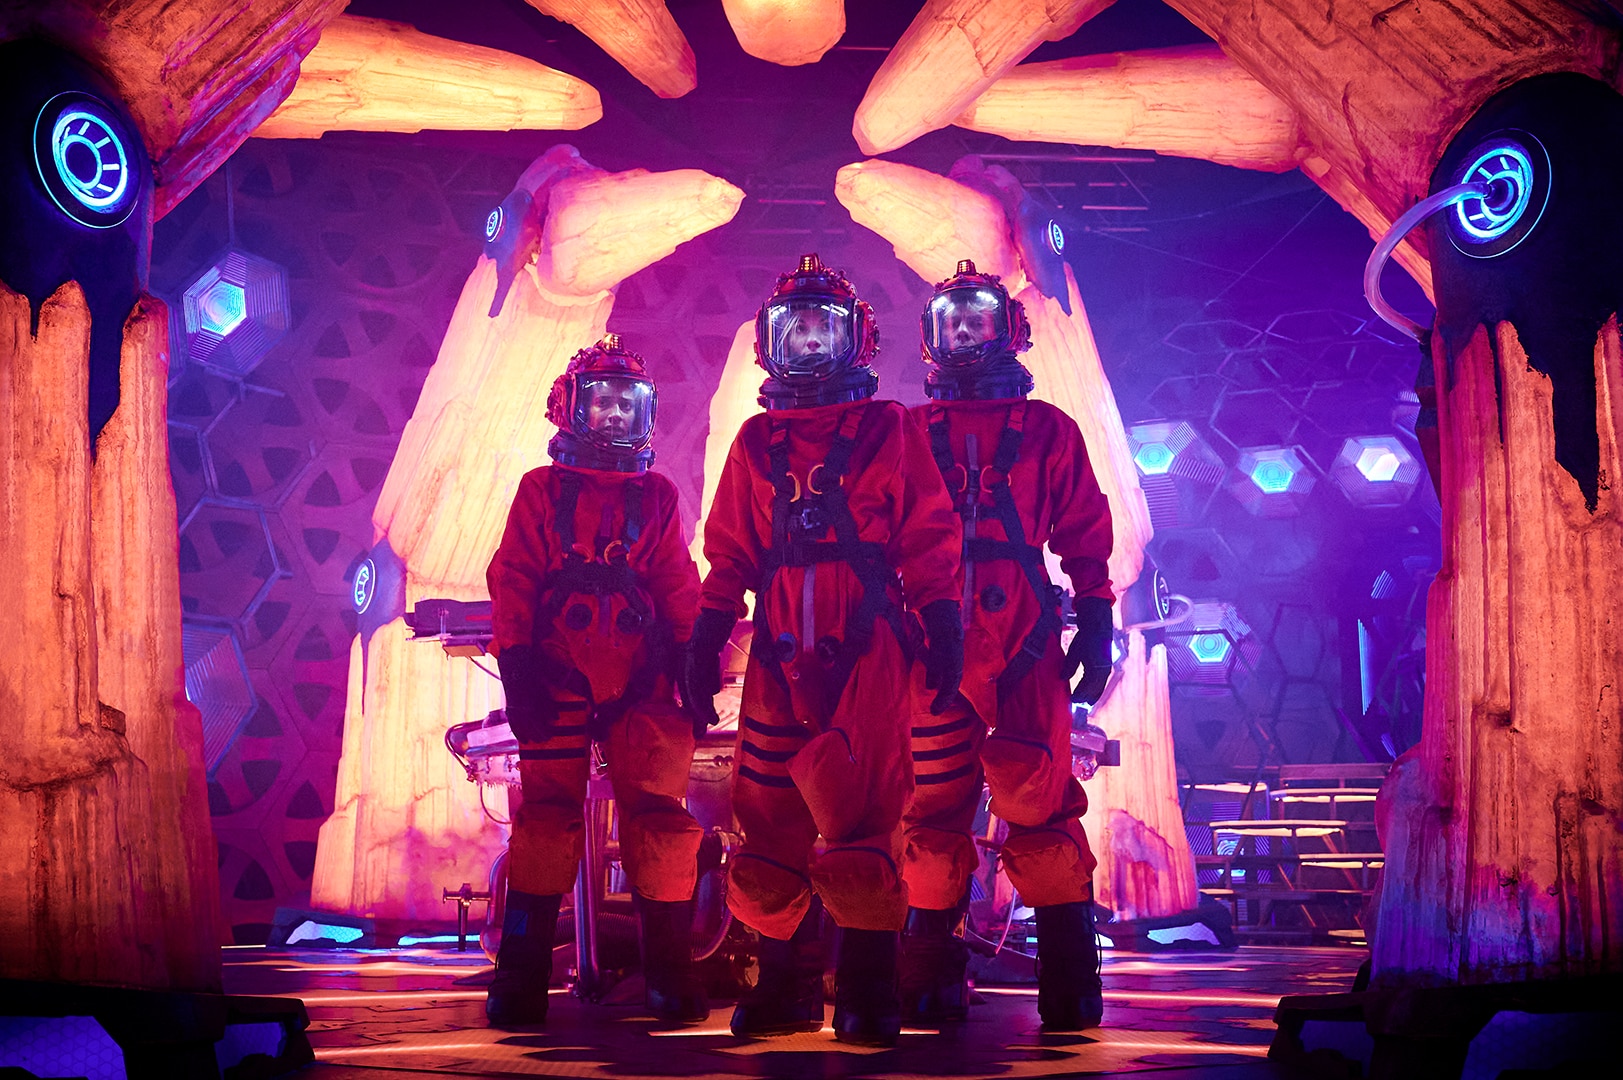 JOhn Bishop, Mandip Gill and Jodie Whittaker in 'The Power of the Doctor', all wearing matching spacesuits